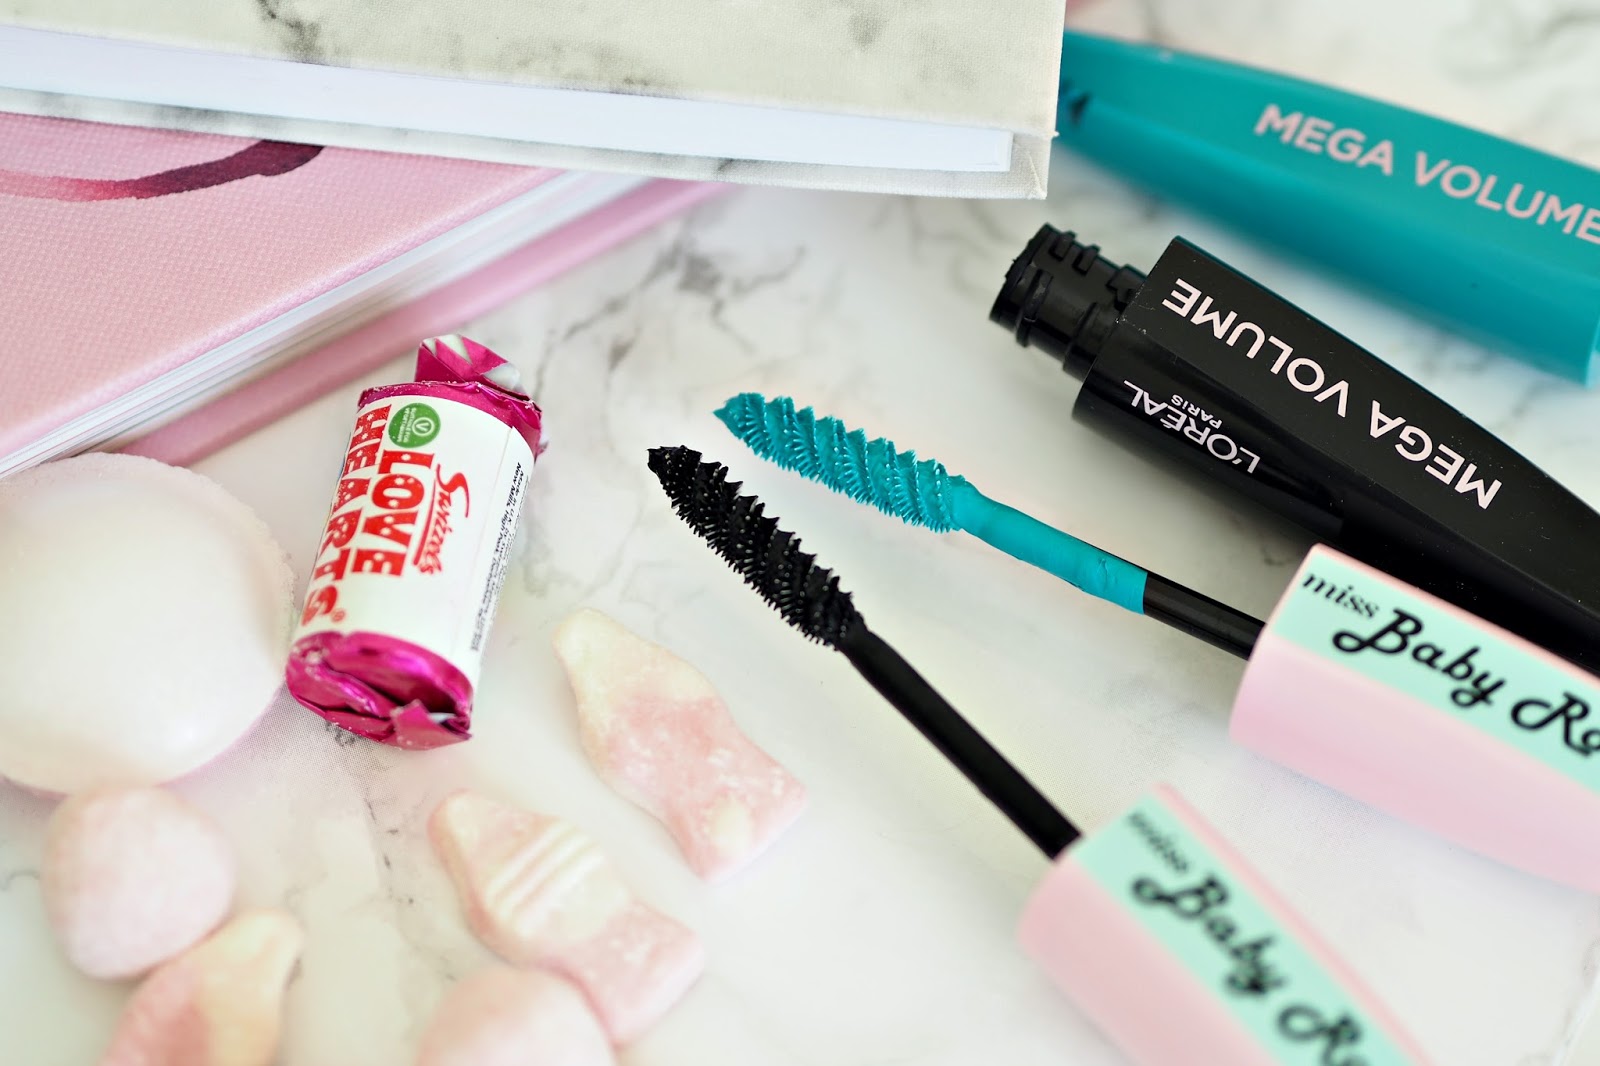 L'Oreal's NEW Baby Roll Mascara review 